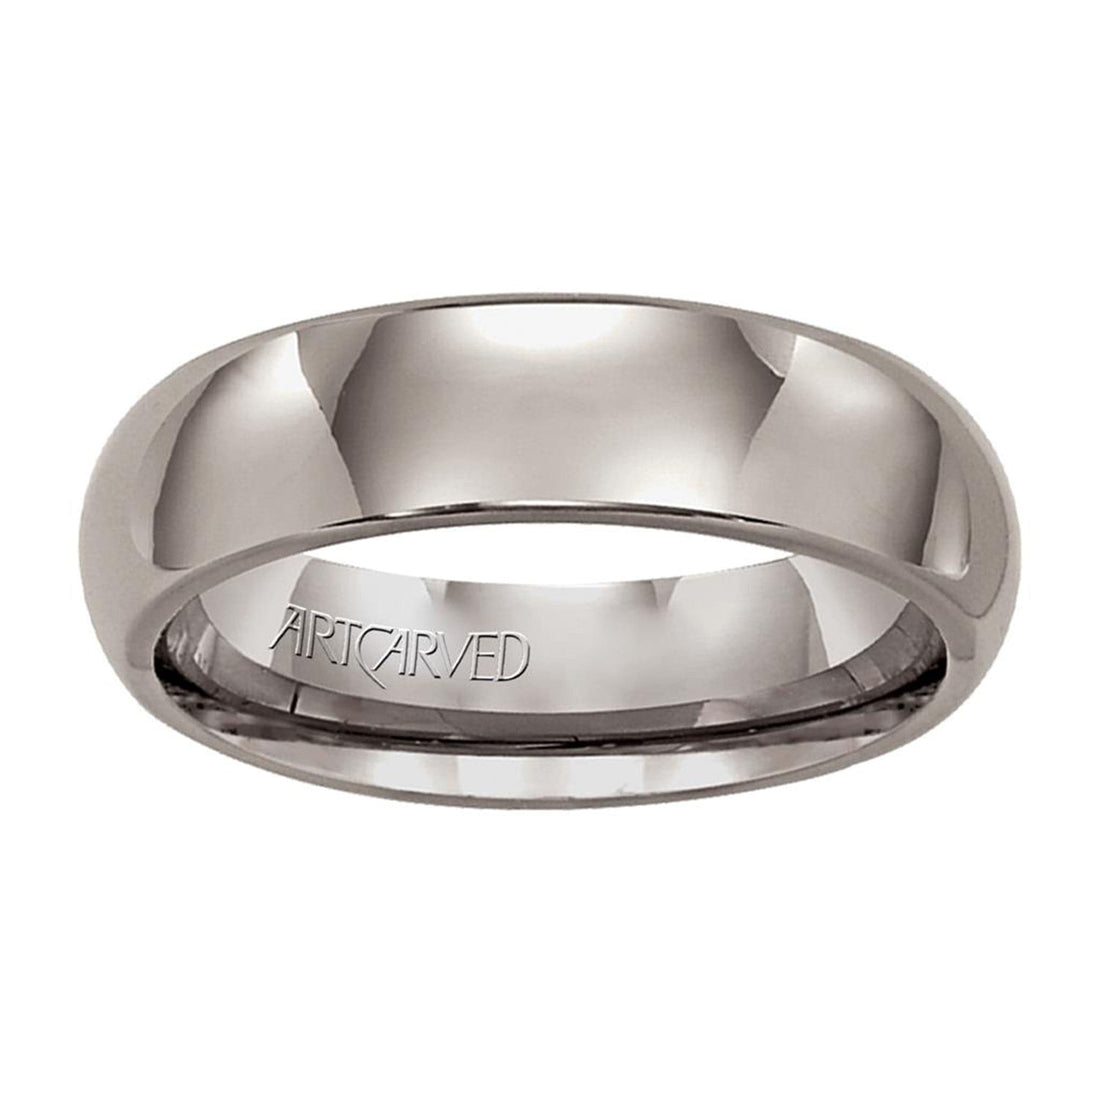 Bright Titanium Wedding Band by Artcarved  Front